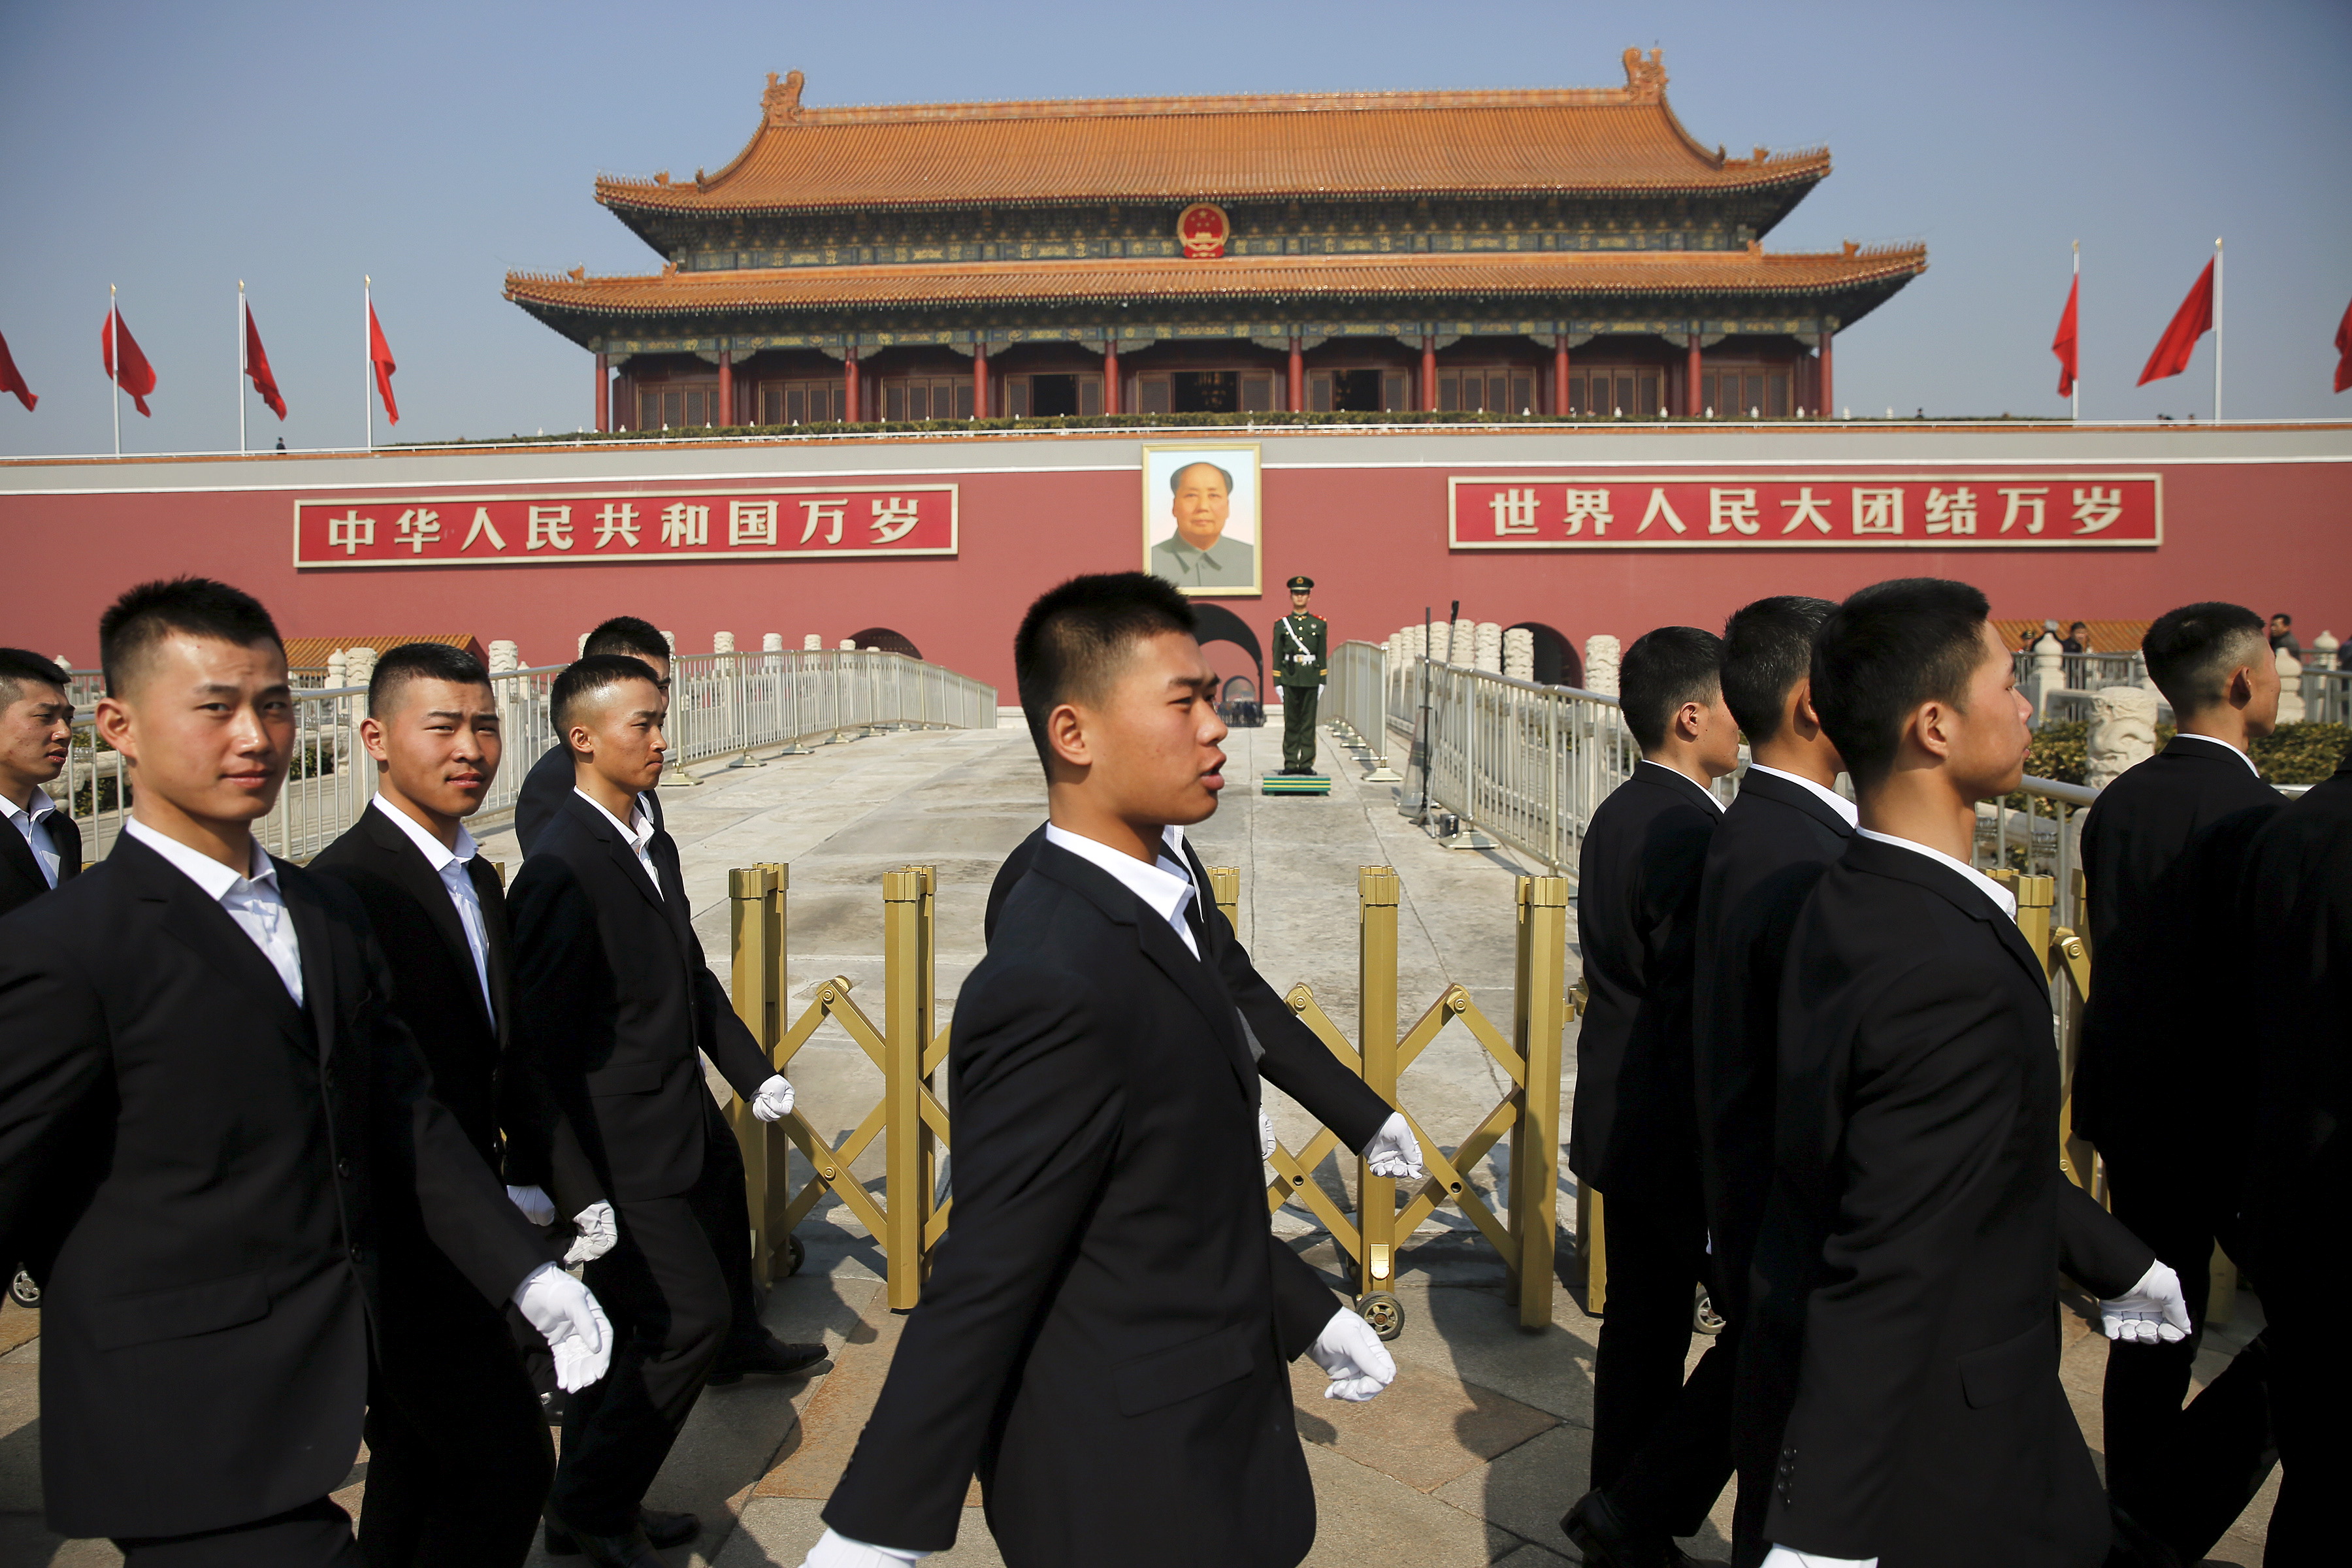 Security personnel march in front of Tiananmen Gate as the area near the Great Hall of the People prepares for upcoming annual sessions of the National People's Congress and Chinese People's Political Consultative Conference in Beijing on March 2, 2016 (Damir Sagolj/Reuters)